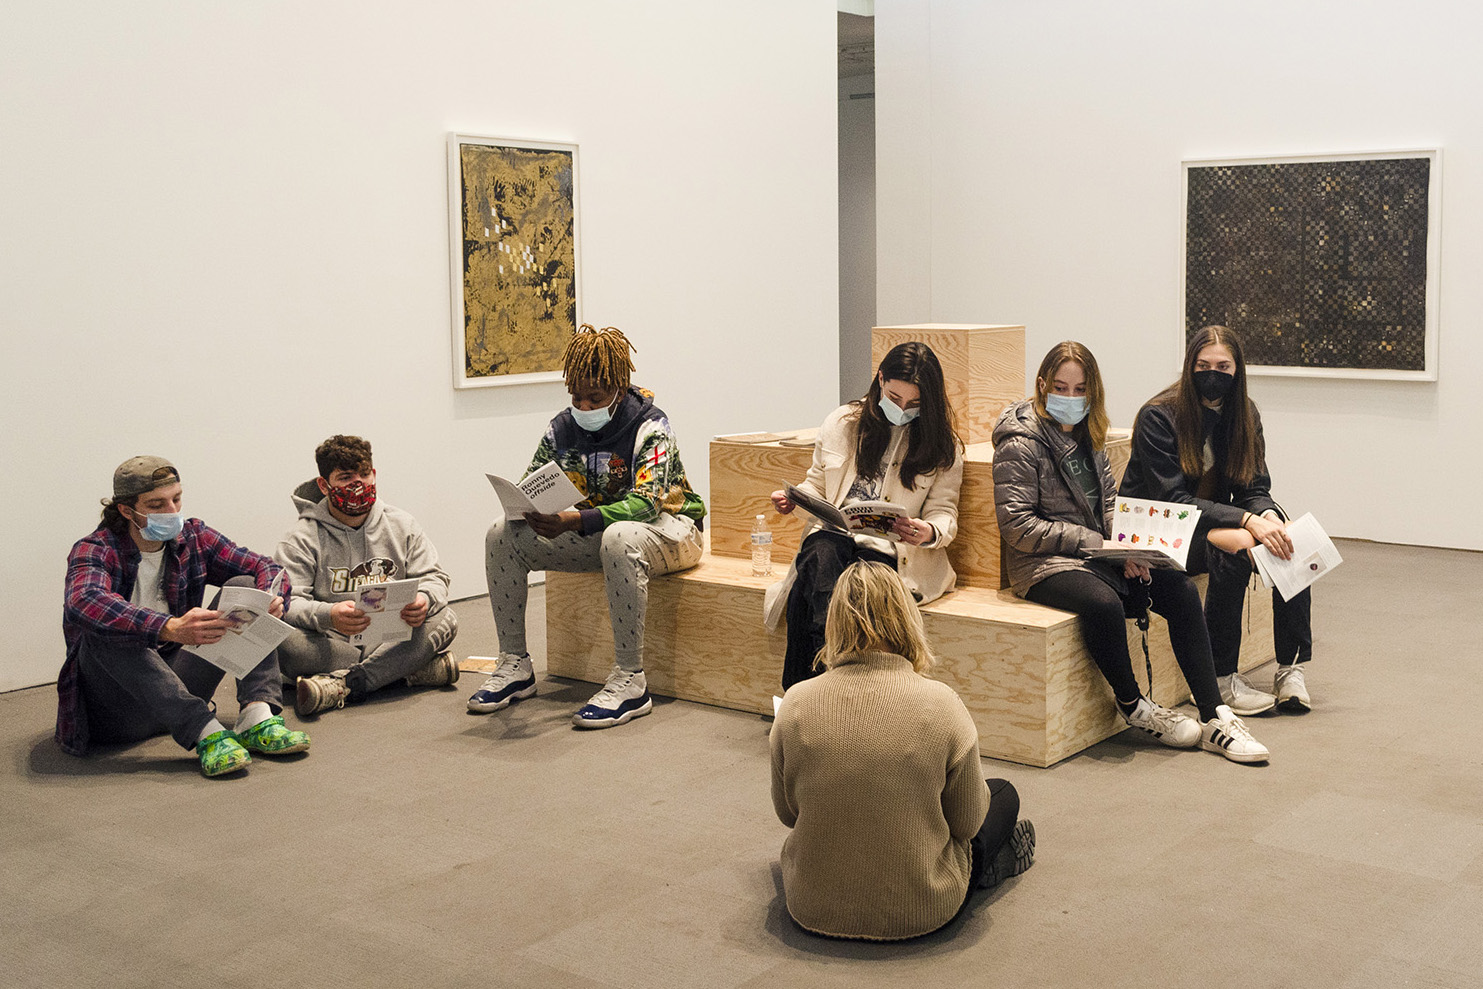 The interior first floor of the University Art Museum. In the foreground a professor wearing a beige sweater sits cross-legged on the ground, their back to us. Six students sit on the ground and on a plywood structure facing the professor. Two  framed artworks are attached to the walls in the background.